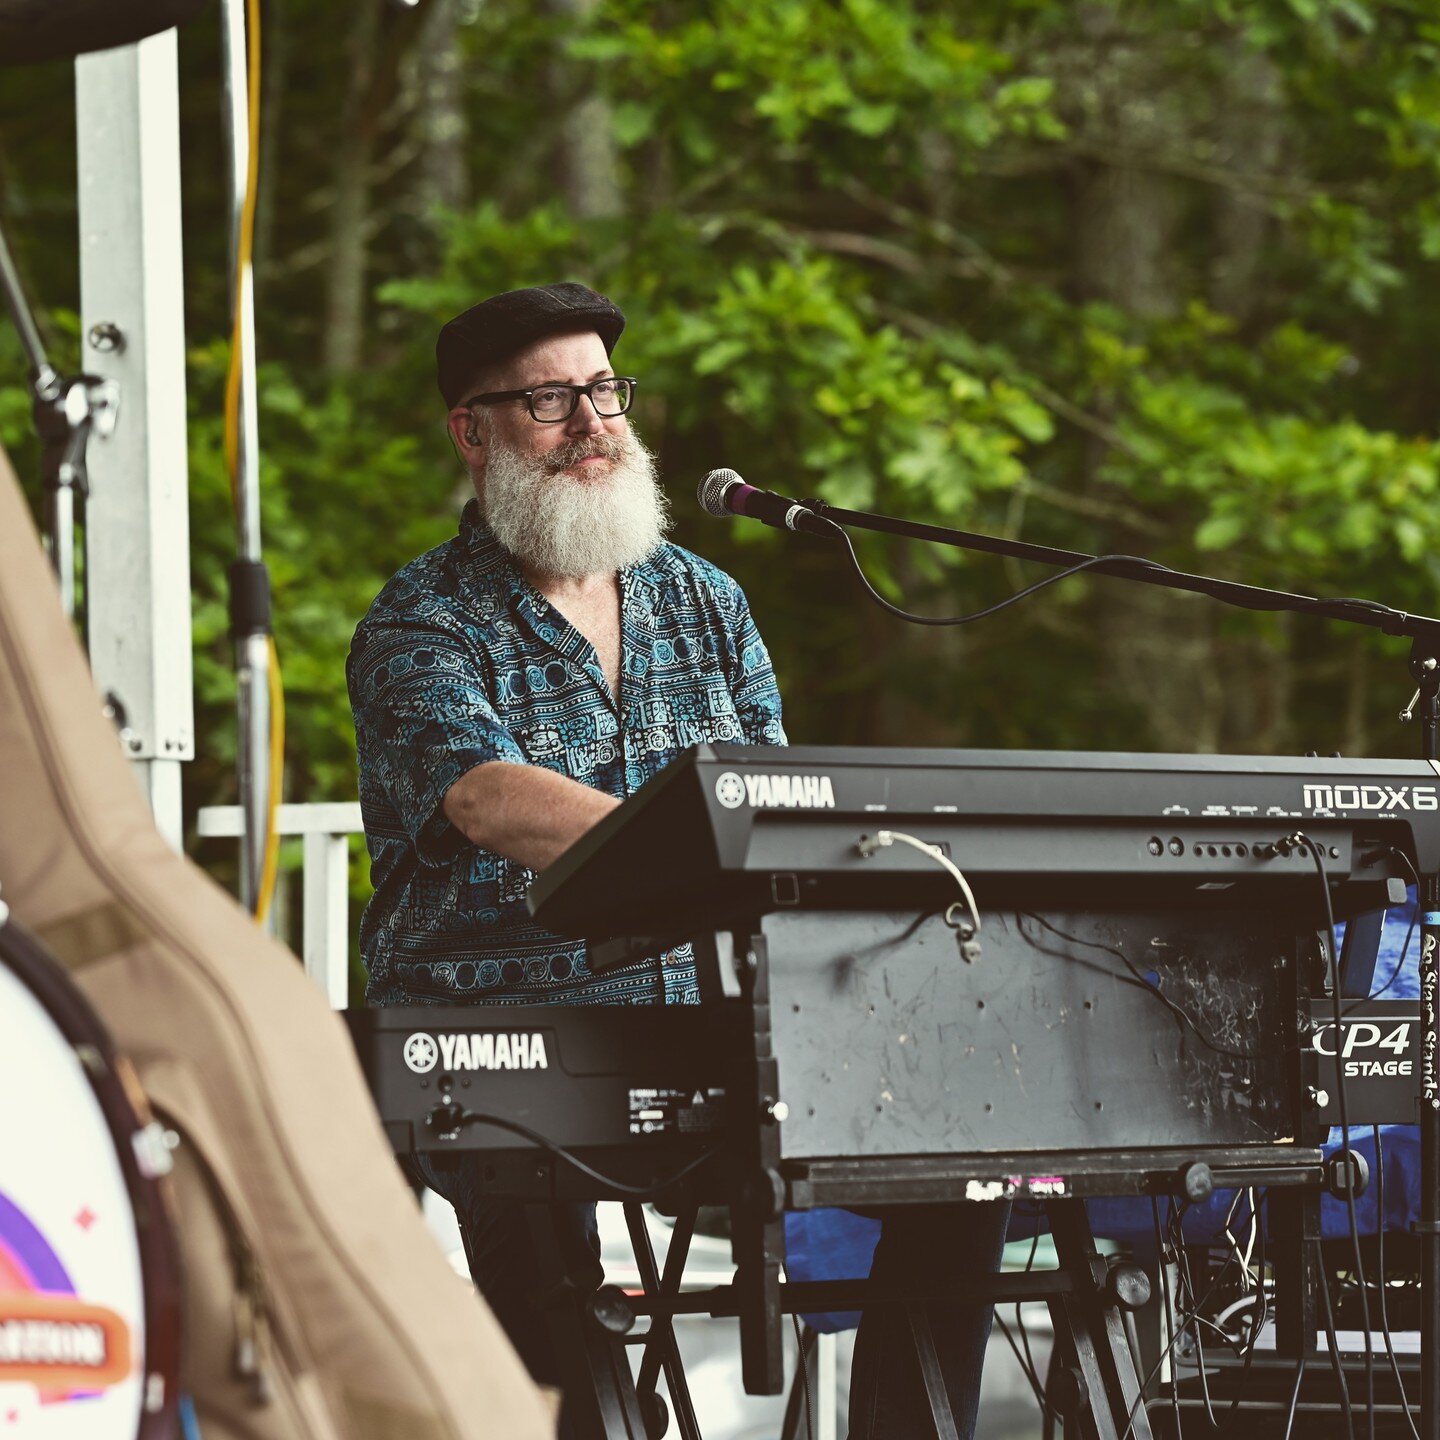 First outdoor show since summer 2019. Rain held off!

With Smith Collaboration Janis Joplin Tribute; Beaver Park Lisbon Maine

Next Event: 
JUL 29
Sturgeon Moon Garden Party
1292 Harpswell Neck Rd. Harpswell, Me

#yamahasynths